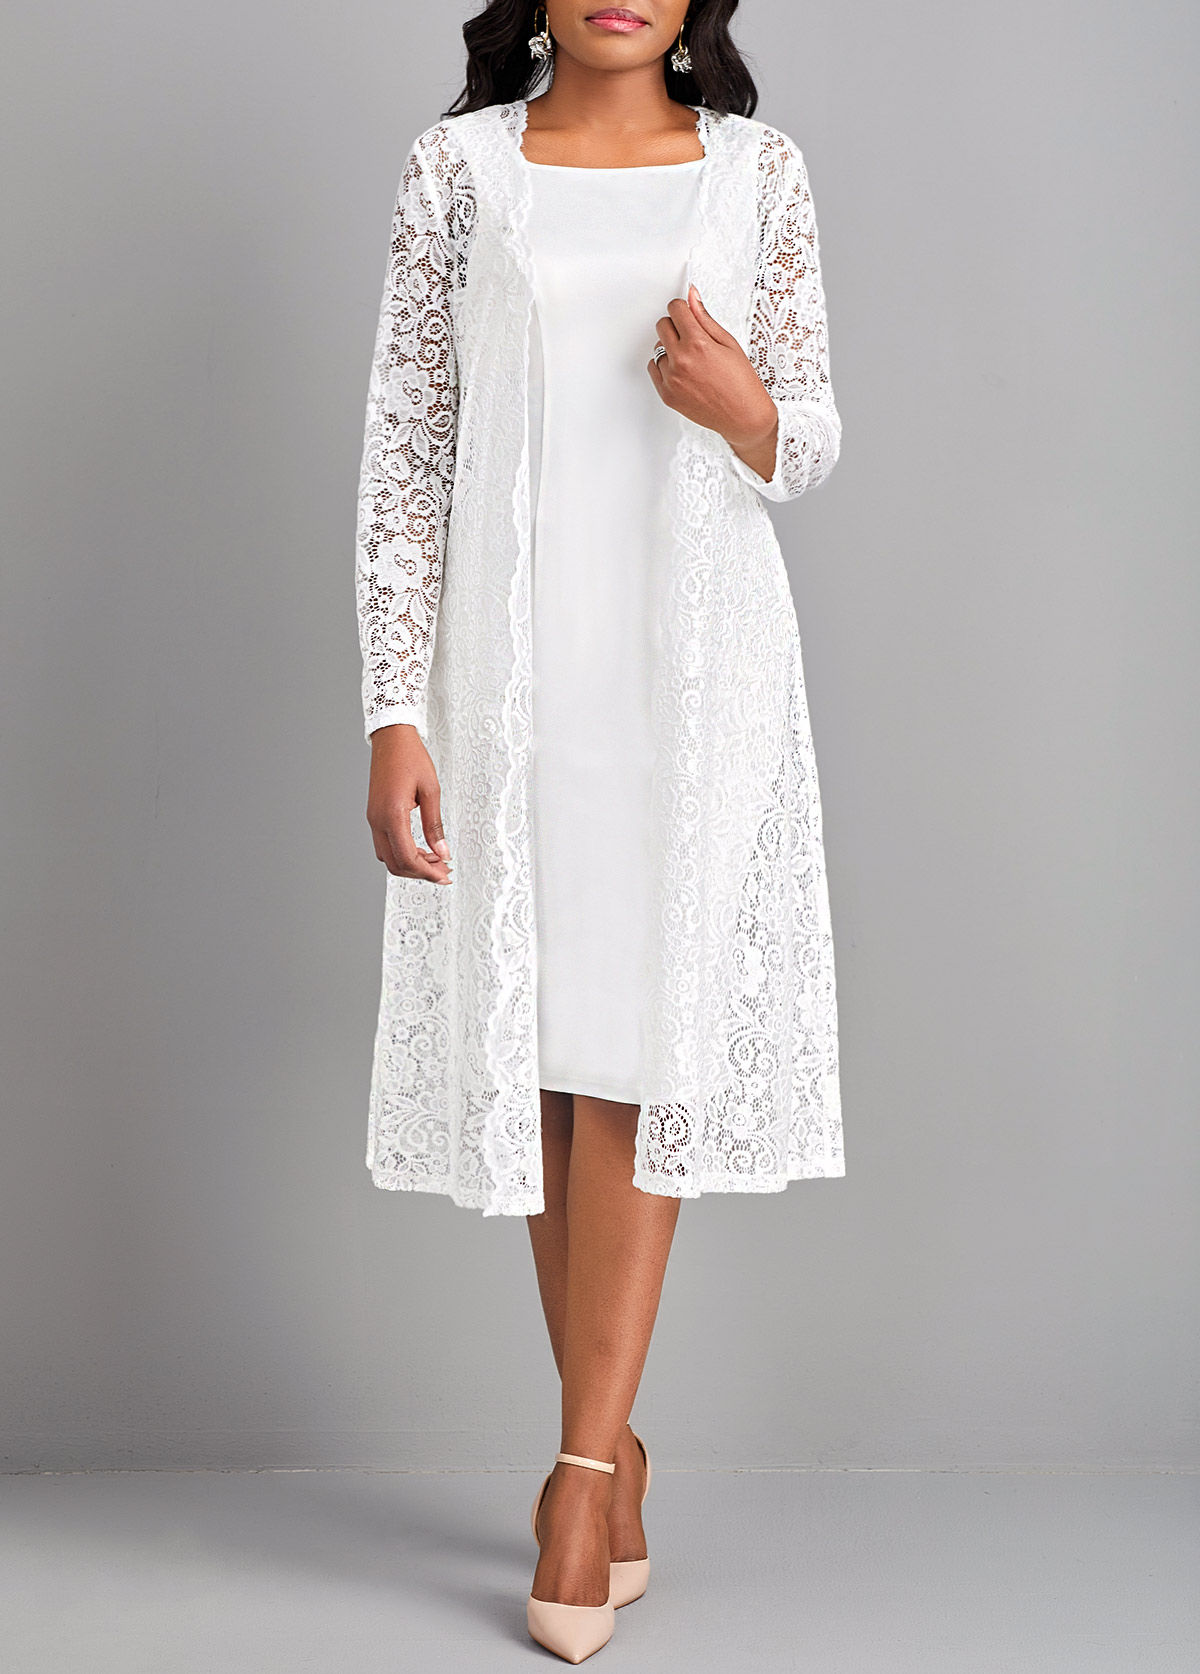 White Lace Two Piece Suit Long Sleeve Dress